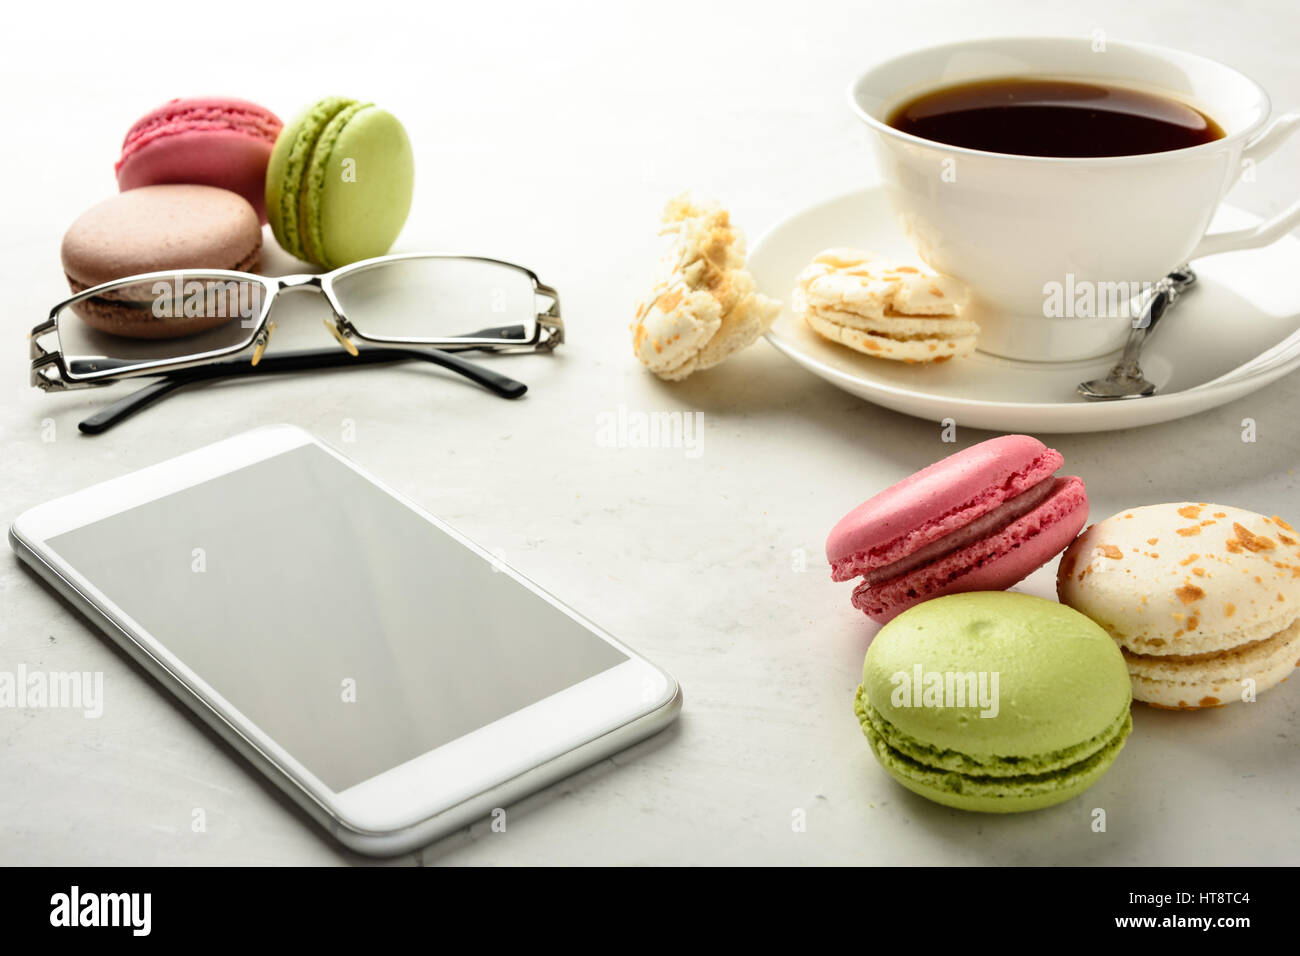 Cup of black tea with tasty varicolored macaroons, smartphone, glasses on a white background in light key. Stock Photo